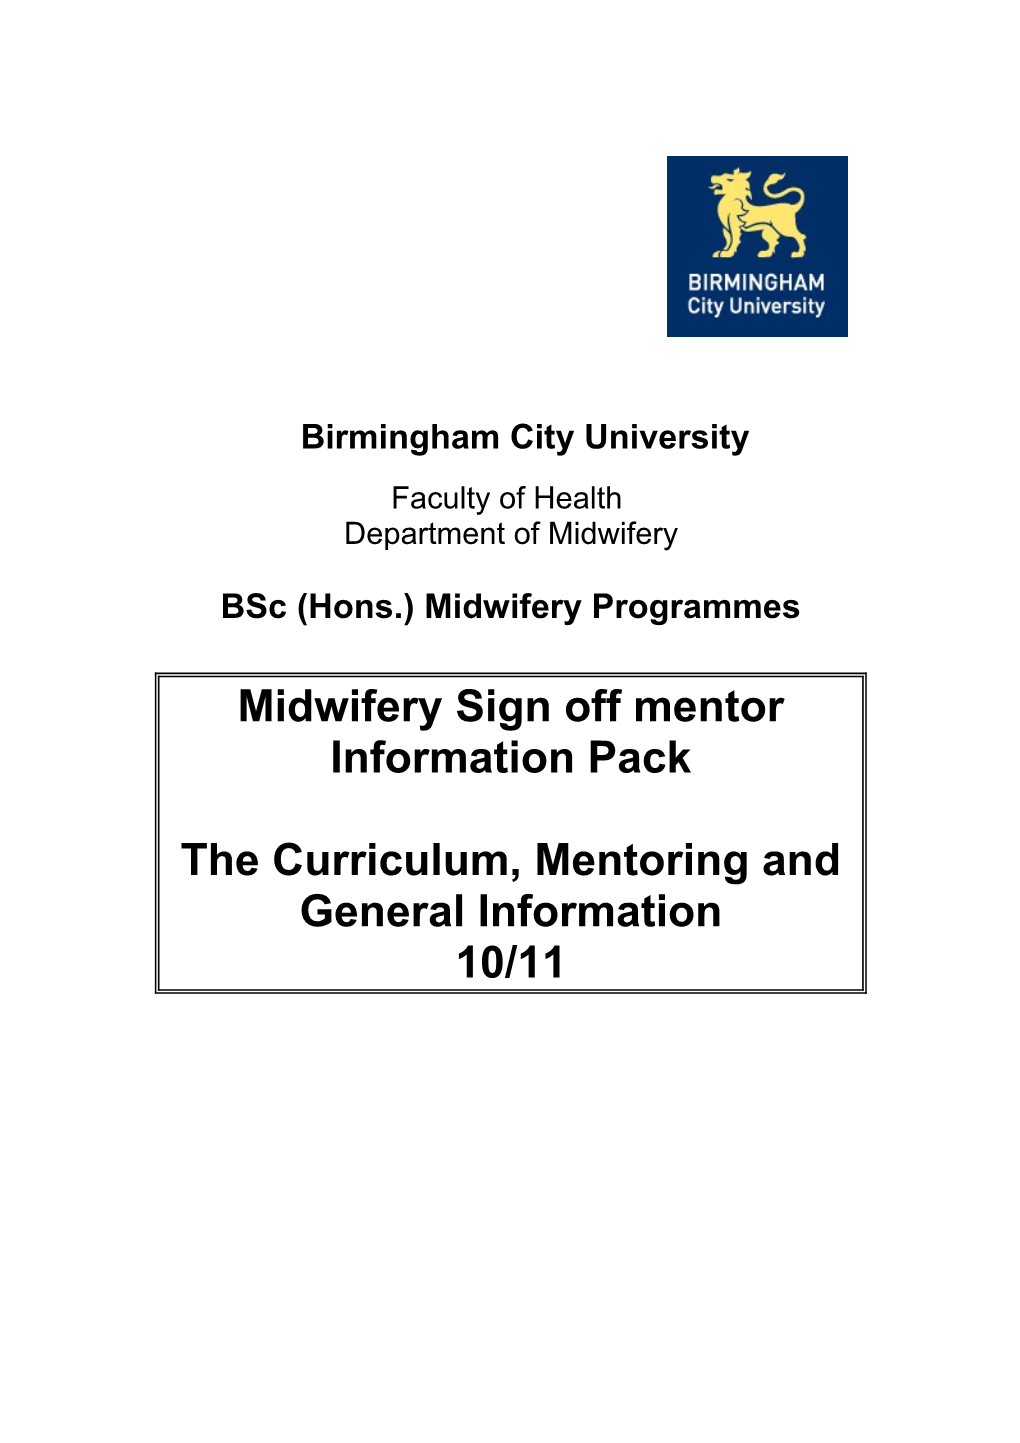 Information for Staff, Mentors and Students